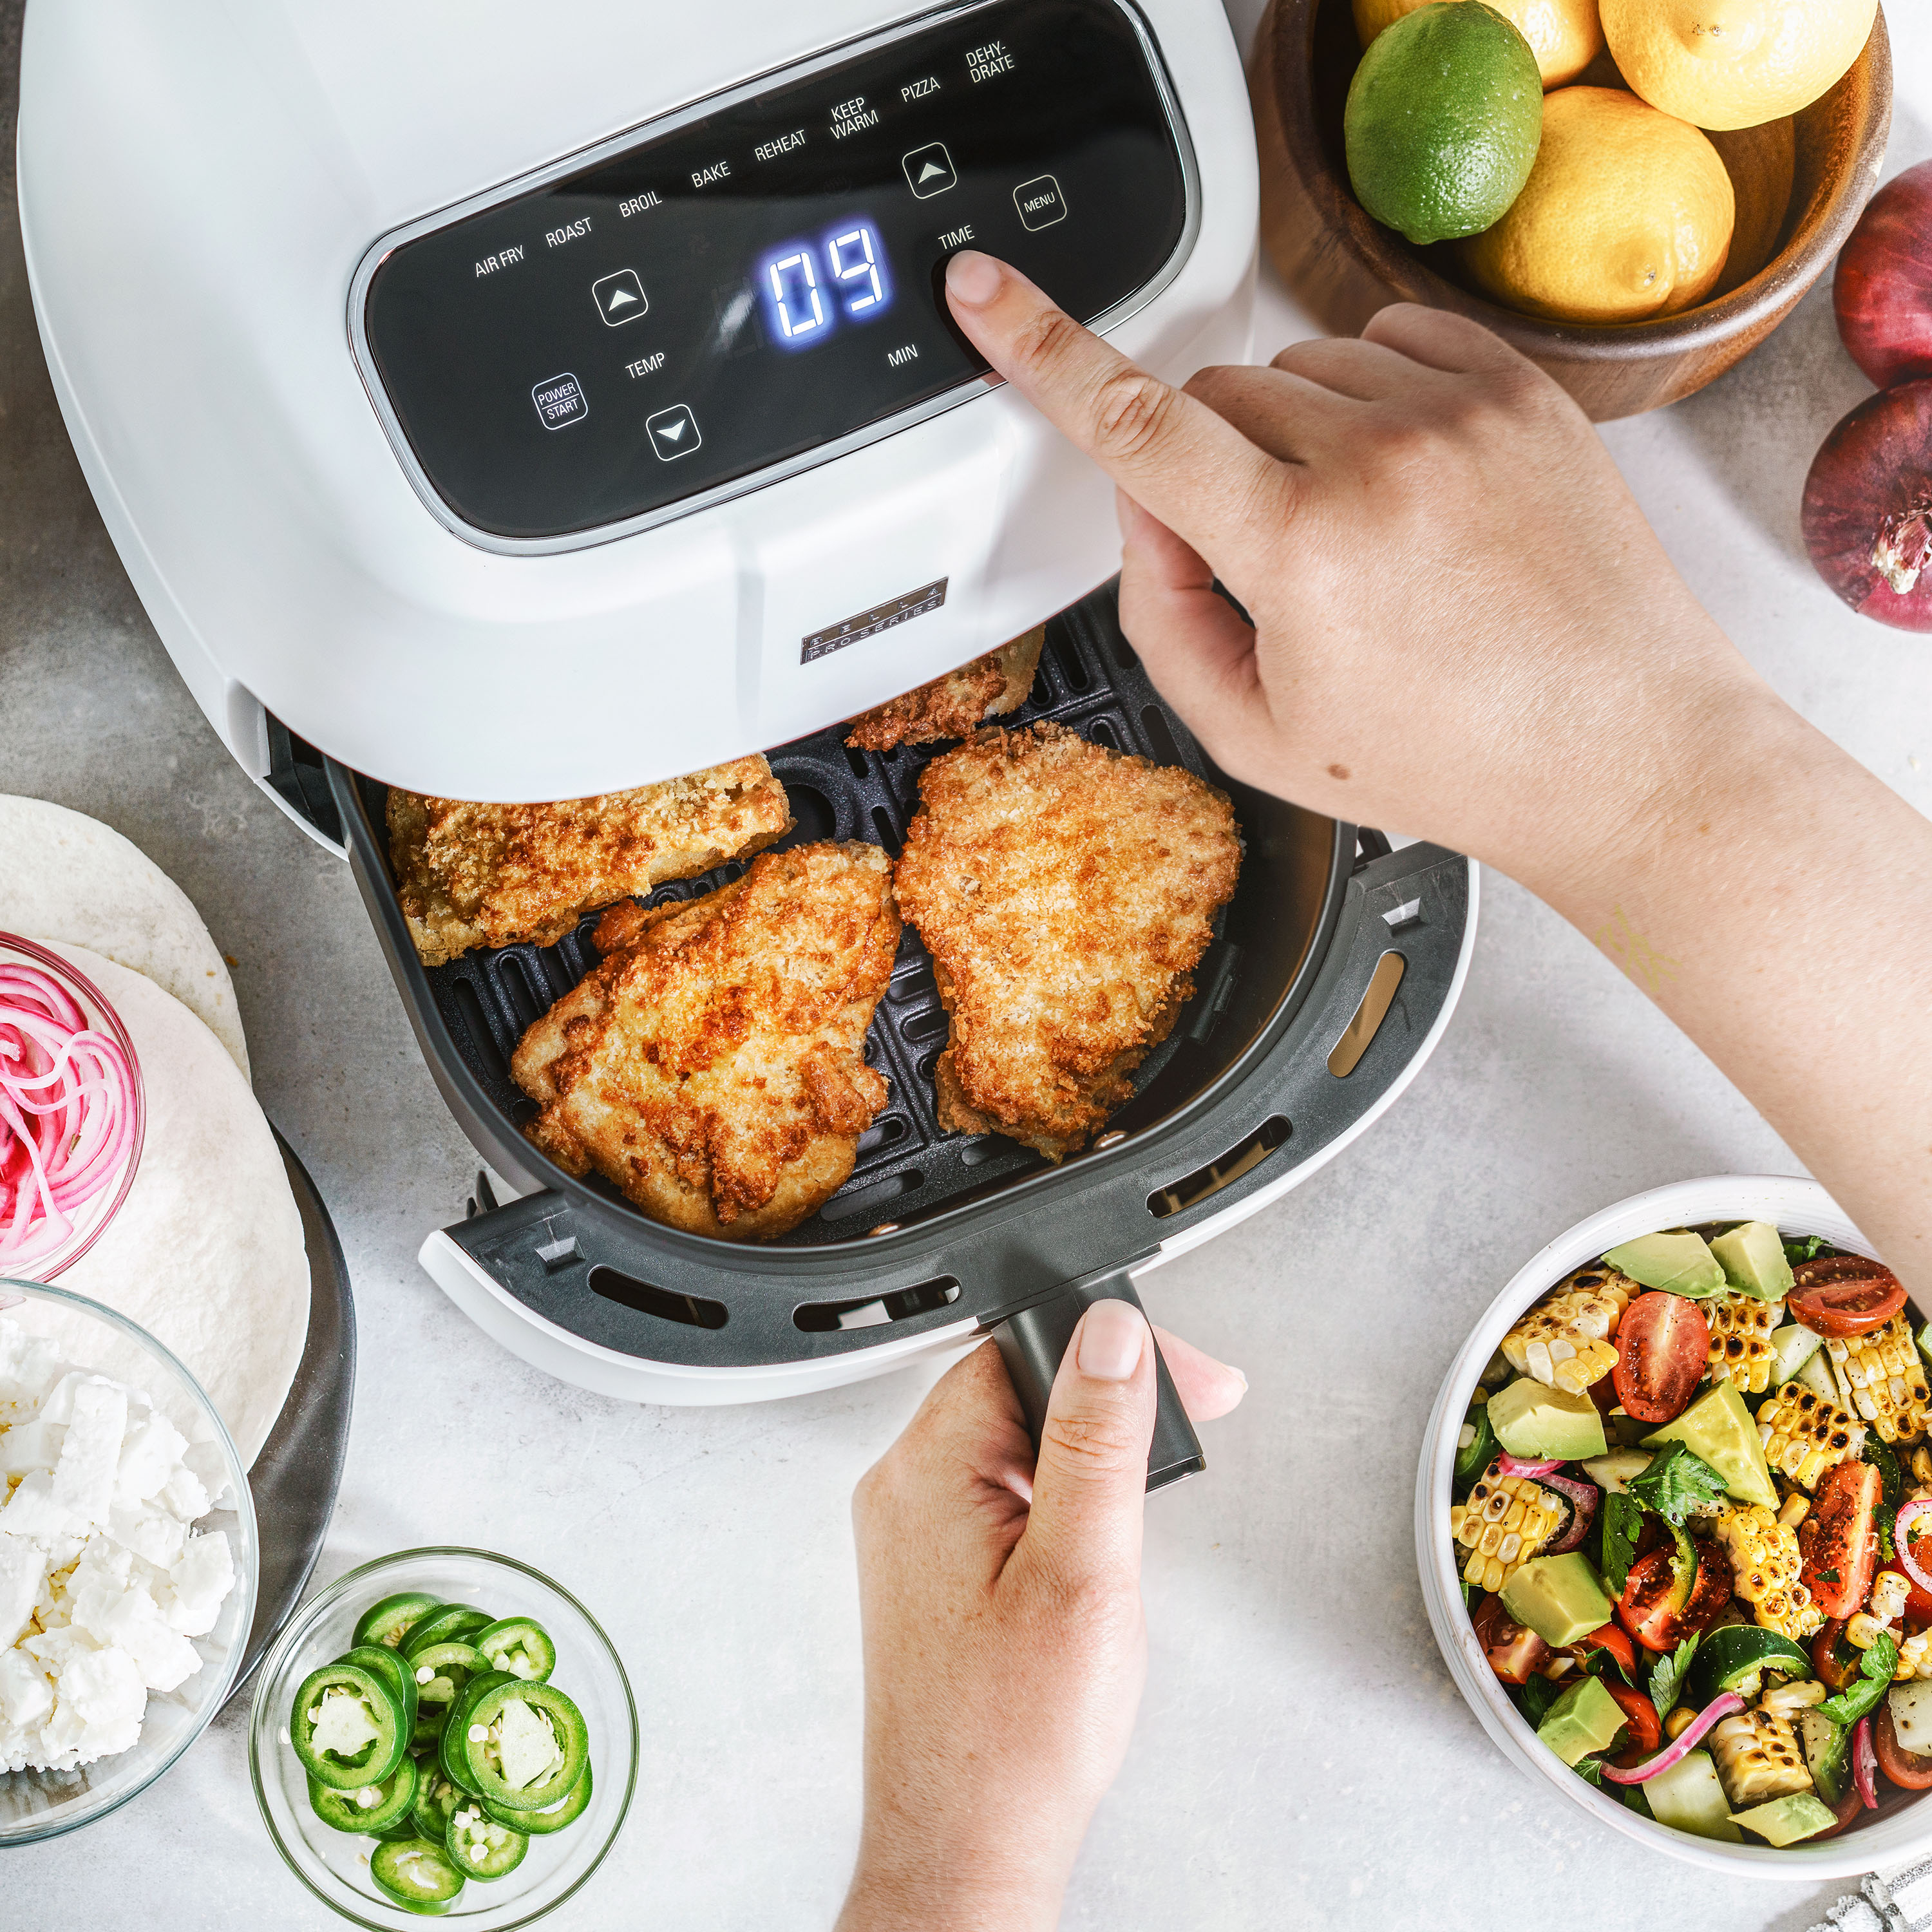 B E L L A on Instagram: Crunchy, juicy perfection in every bite 🤩 With  our Bella 8qt Digital Air Fryer, you can whip up delicious, healthier meals  that feeds the whole family 🙌